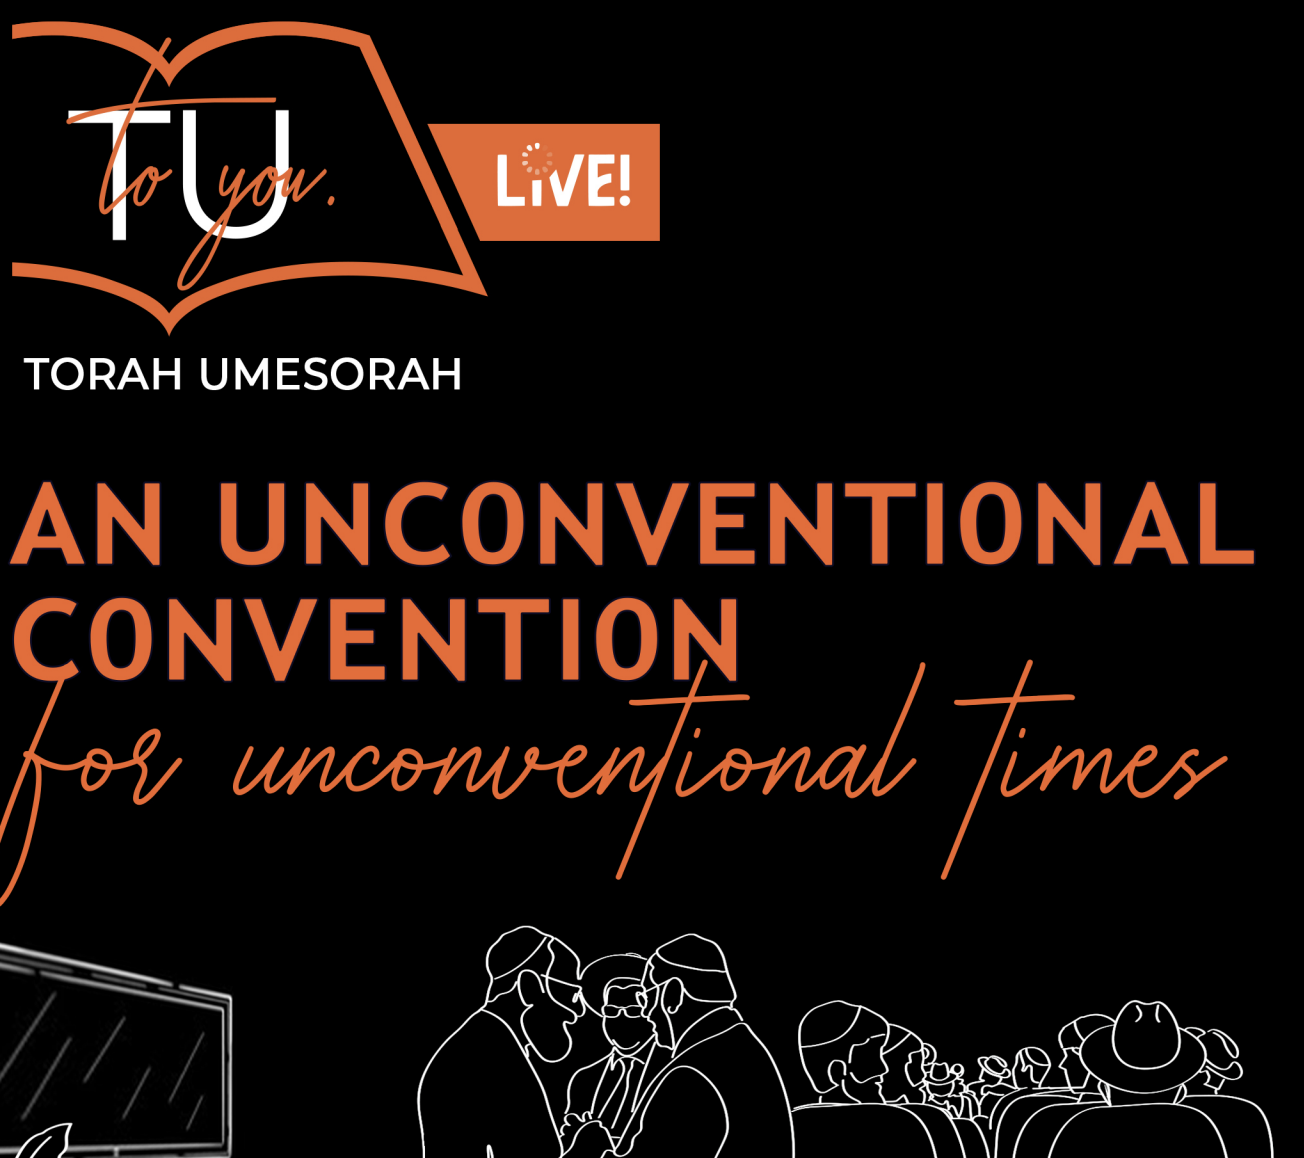 WATCH LIVE NOW The Torah Umesorah Virtual Convention The Lakewood Scoop